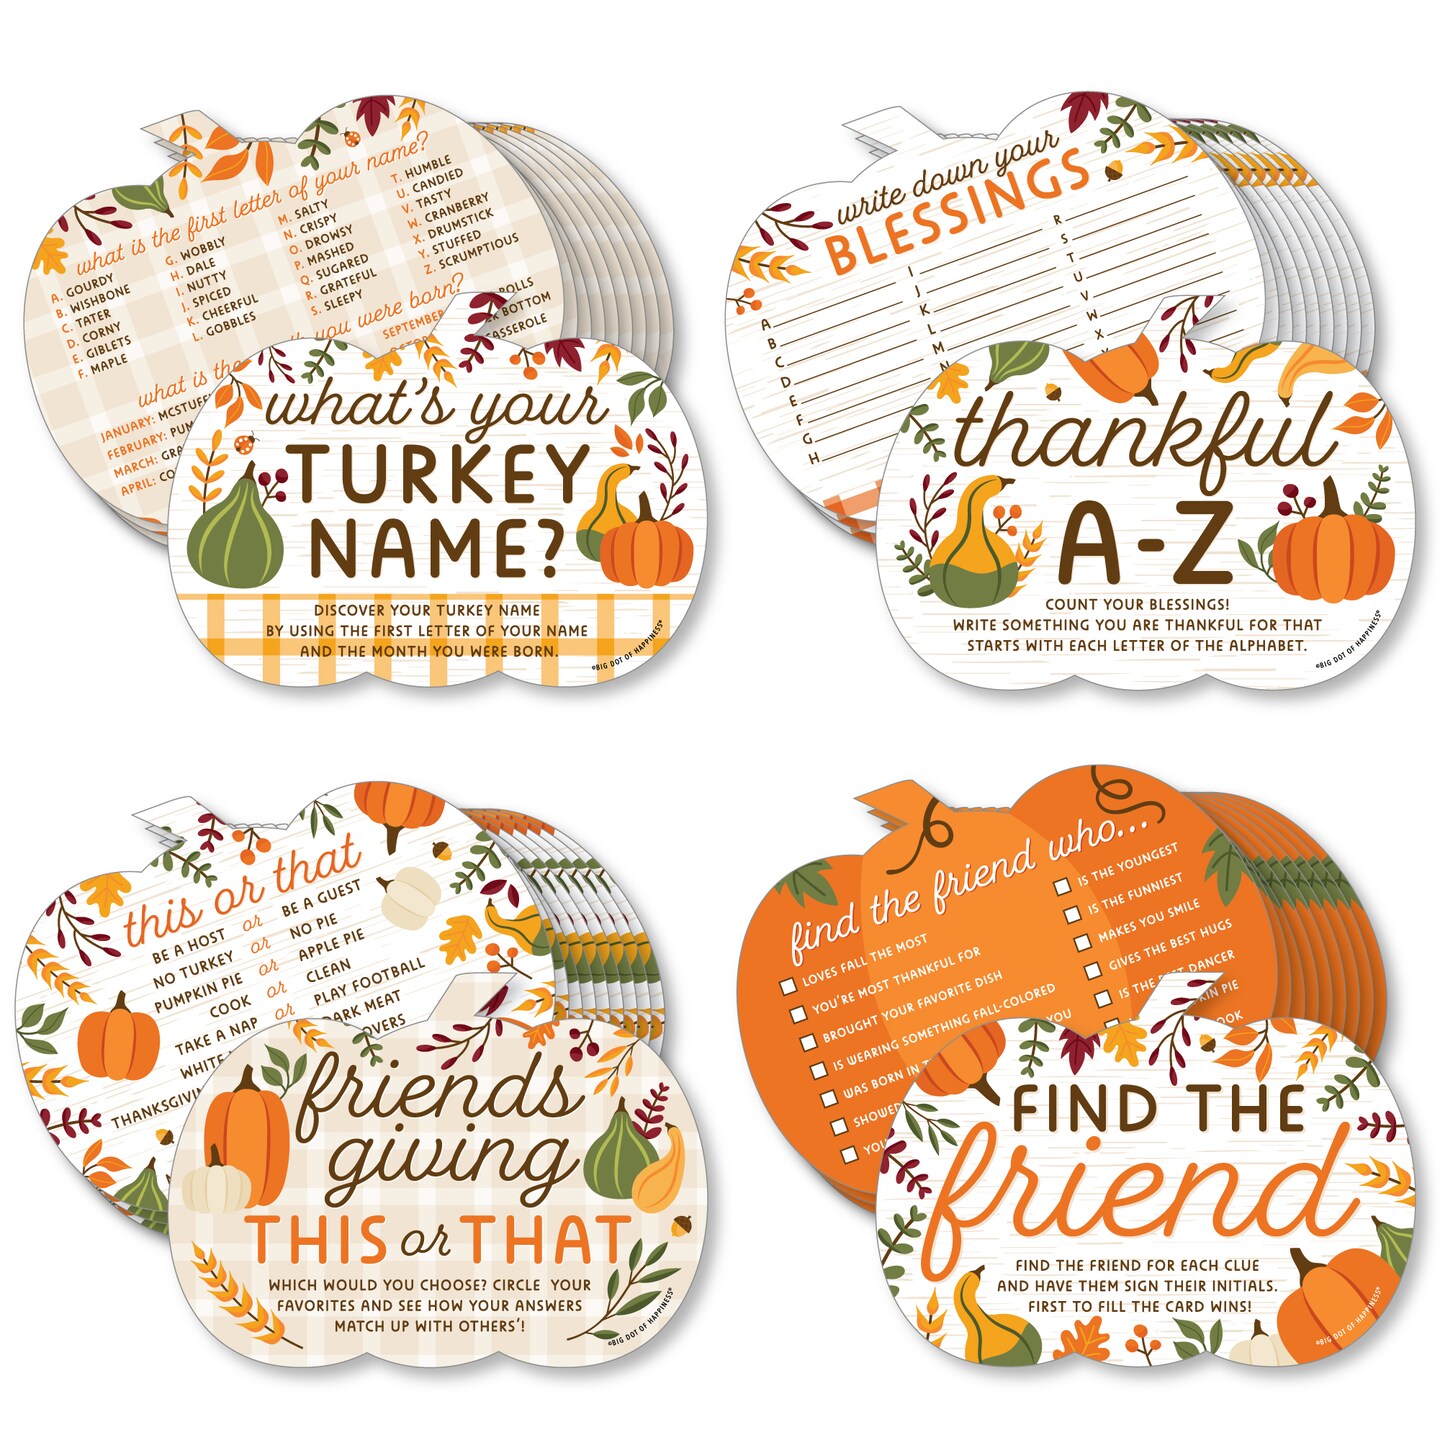 These stylish logo playing cards will look great this Thanksgiving when you're  gathered around the table for a friendly game with friends…